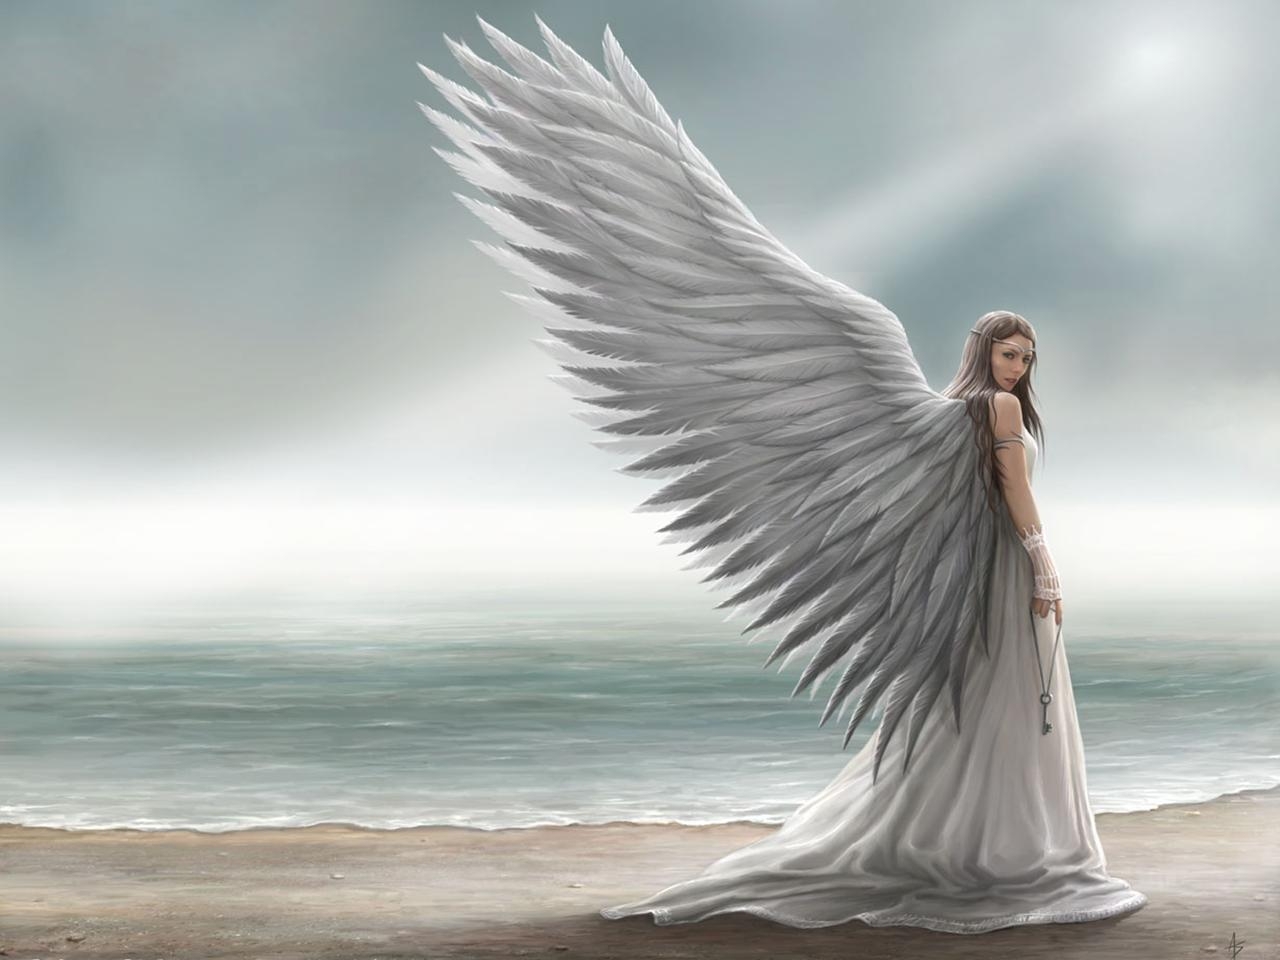 33106 download wallpaper angels, fantasy, girls, gray screensavers and pictures for free